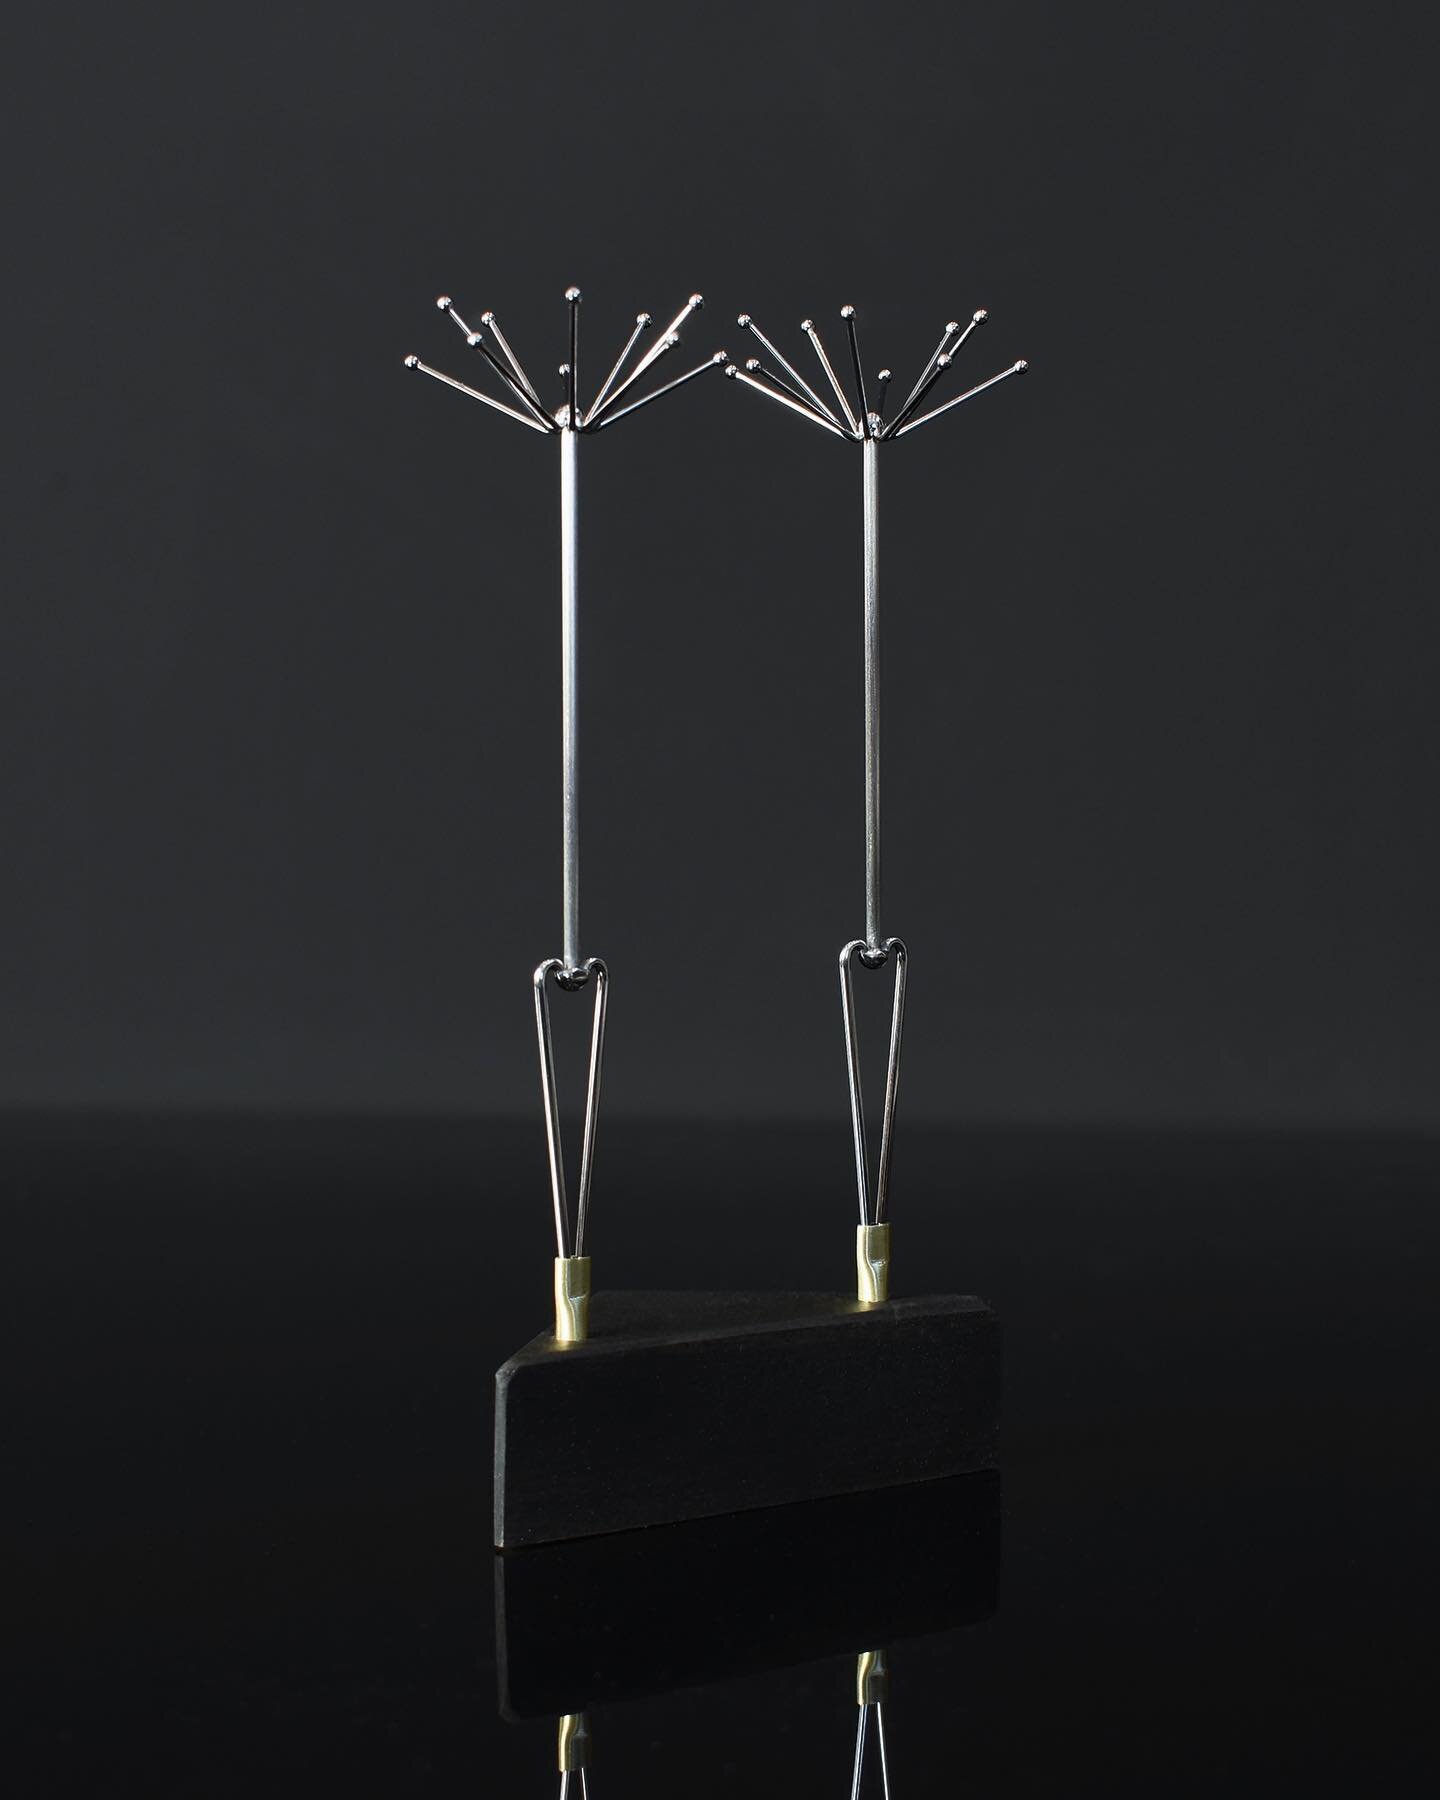 Martini Roulettes part 2.

A pair of martini picks in their wood &amp; brass stand and packaging. See previous post for more videos and info. 

Inspired by the form and aerodynamic structure of a single Salsify or Dandelion seedling, the pick will sp